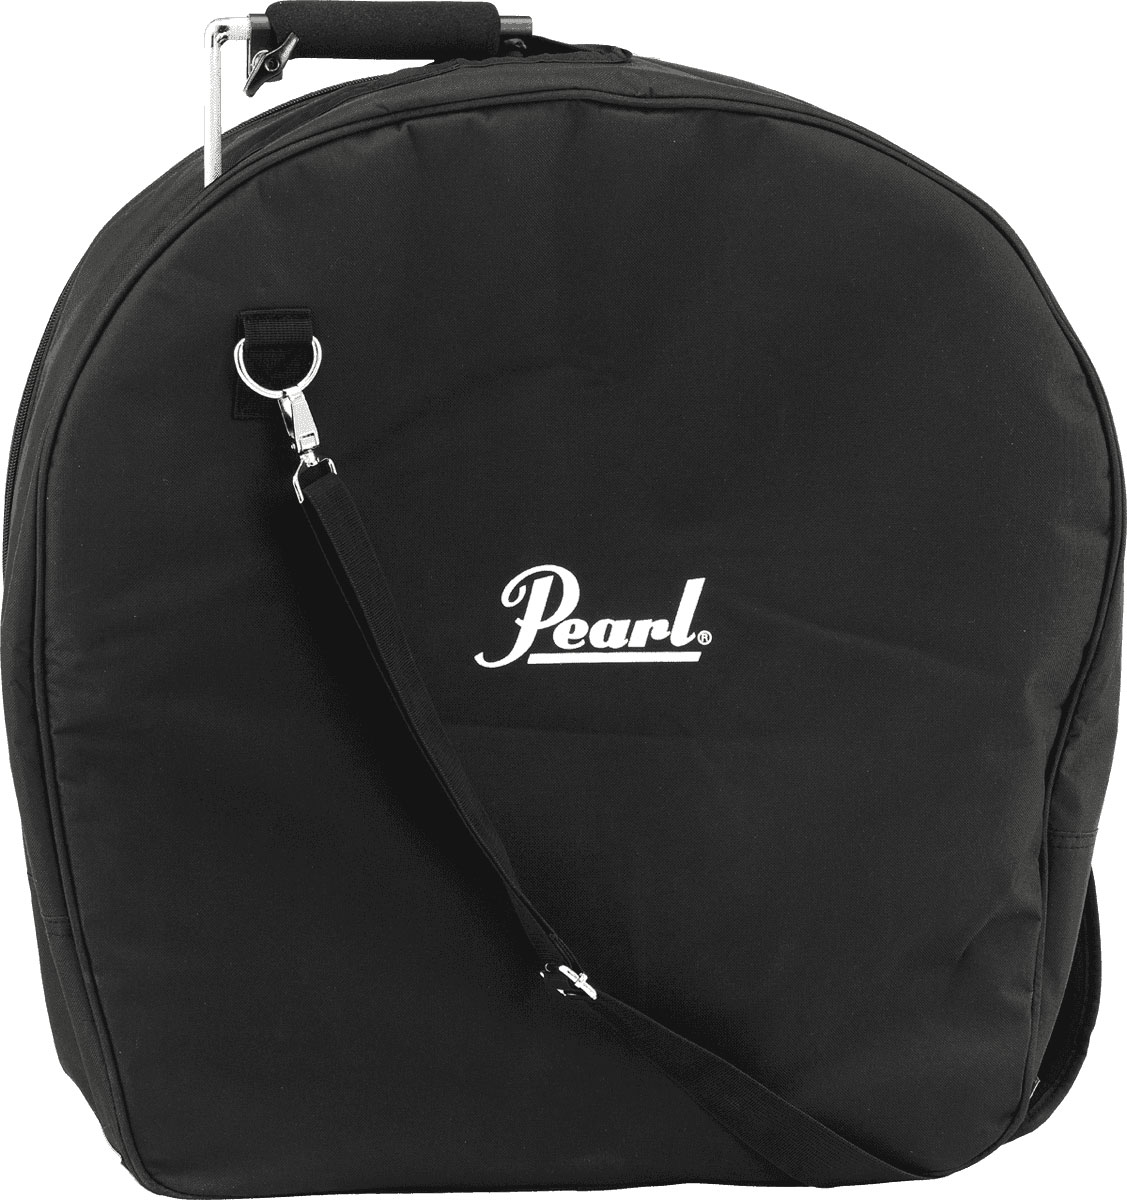 PEARL DRUMS HOUSSE POUR COMPACT TRAVELER